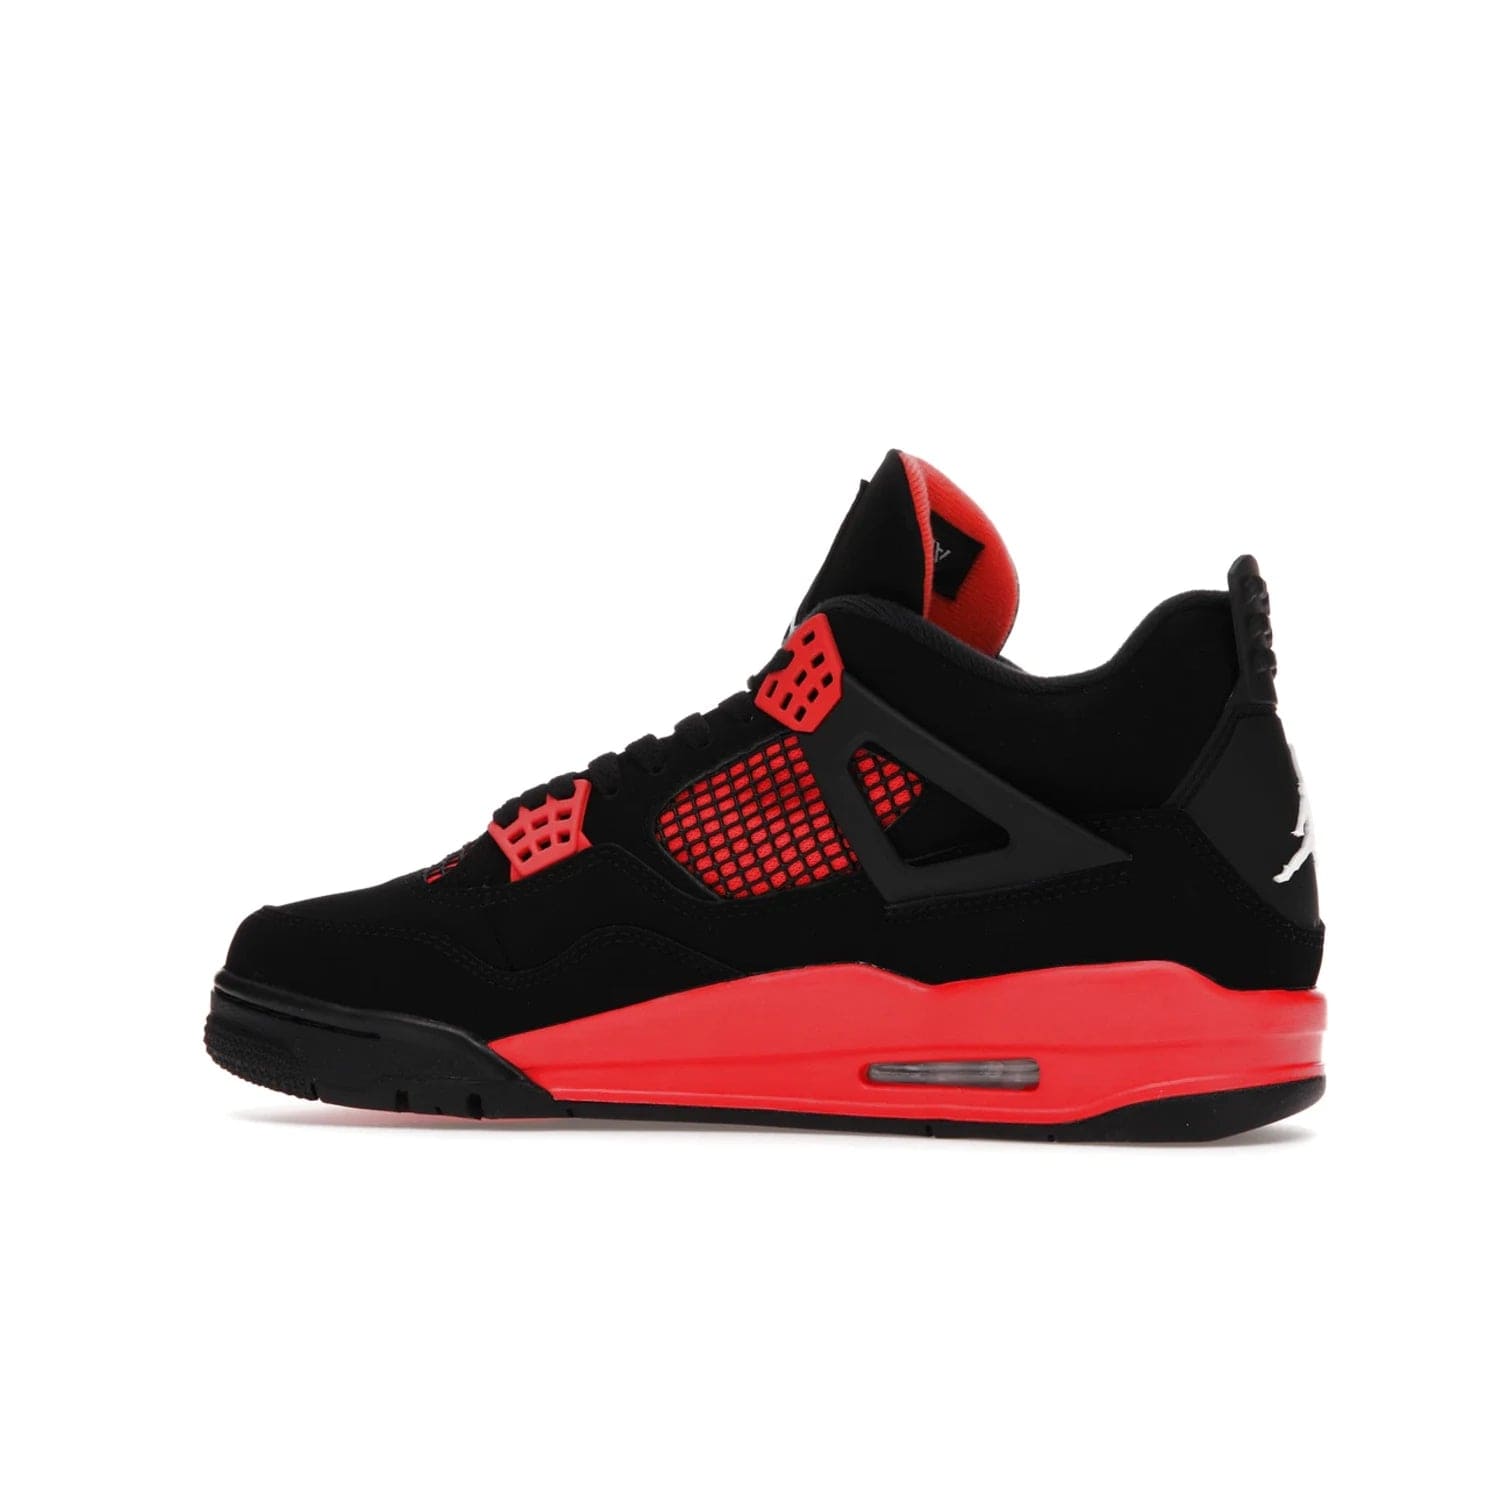 Jordan 4 Retro Red Thunder - Image 21 - Only at www.BallersClubKickz.com - Upscale your footwear with the Air Jordan 4 Retro Red Thunder. Featuring a Durabuck upper, red underlays, signature Flight patch, and vibrant red midsole, this retro sneaker adds style and edge. Releases in January 2022.